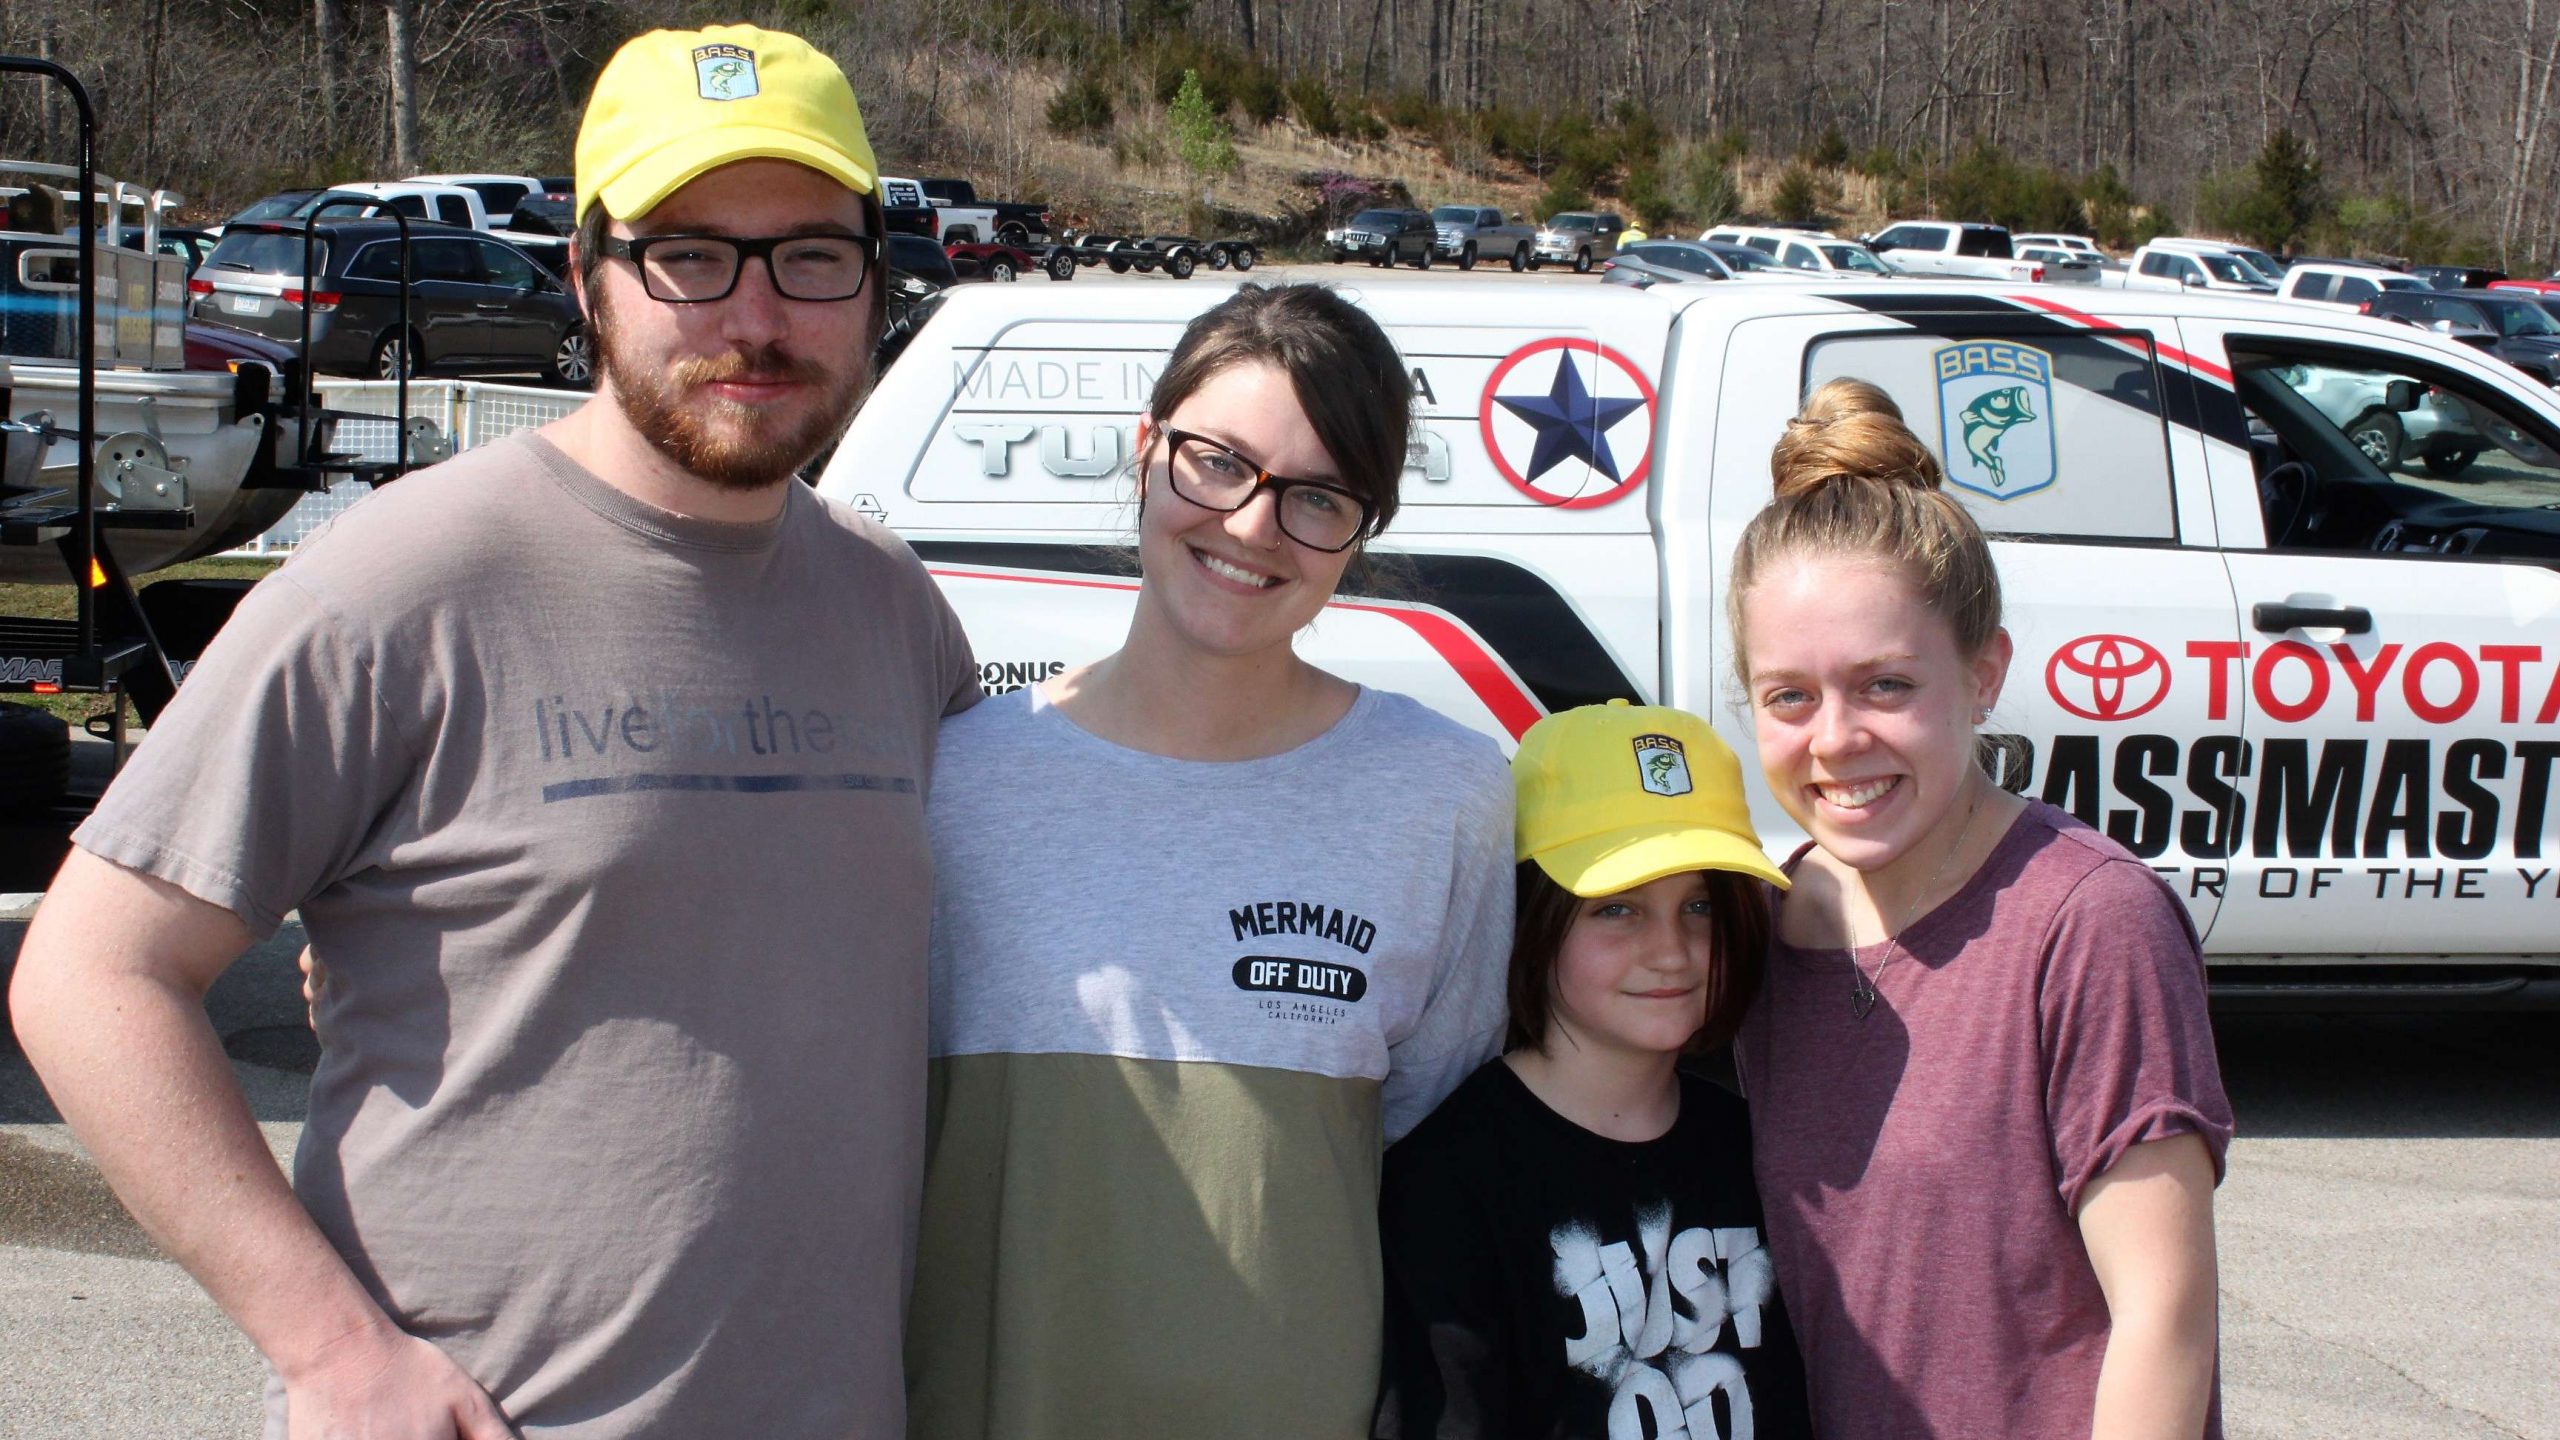 Volunteers are a huge part of the B.A.S.S. community. Pictured from left are Kyle Matthews, Melissa Eagan, Chaz Eagan, and Kenzie Beeler who drove down from Lee Summit, Missouri to lend a hand. 